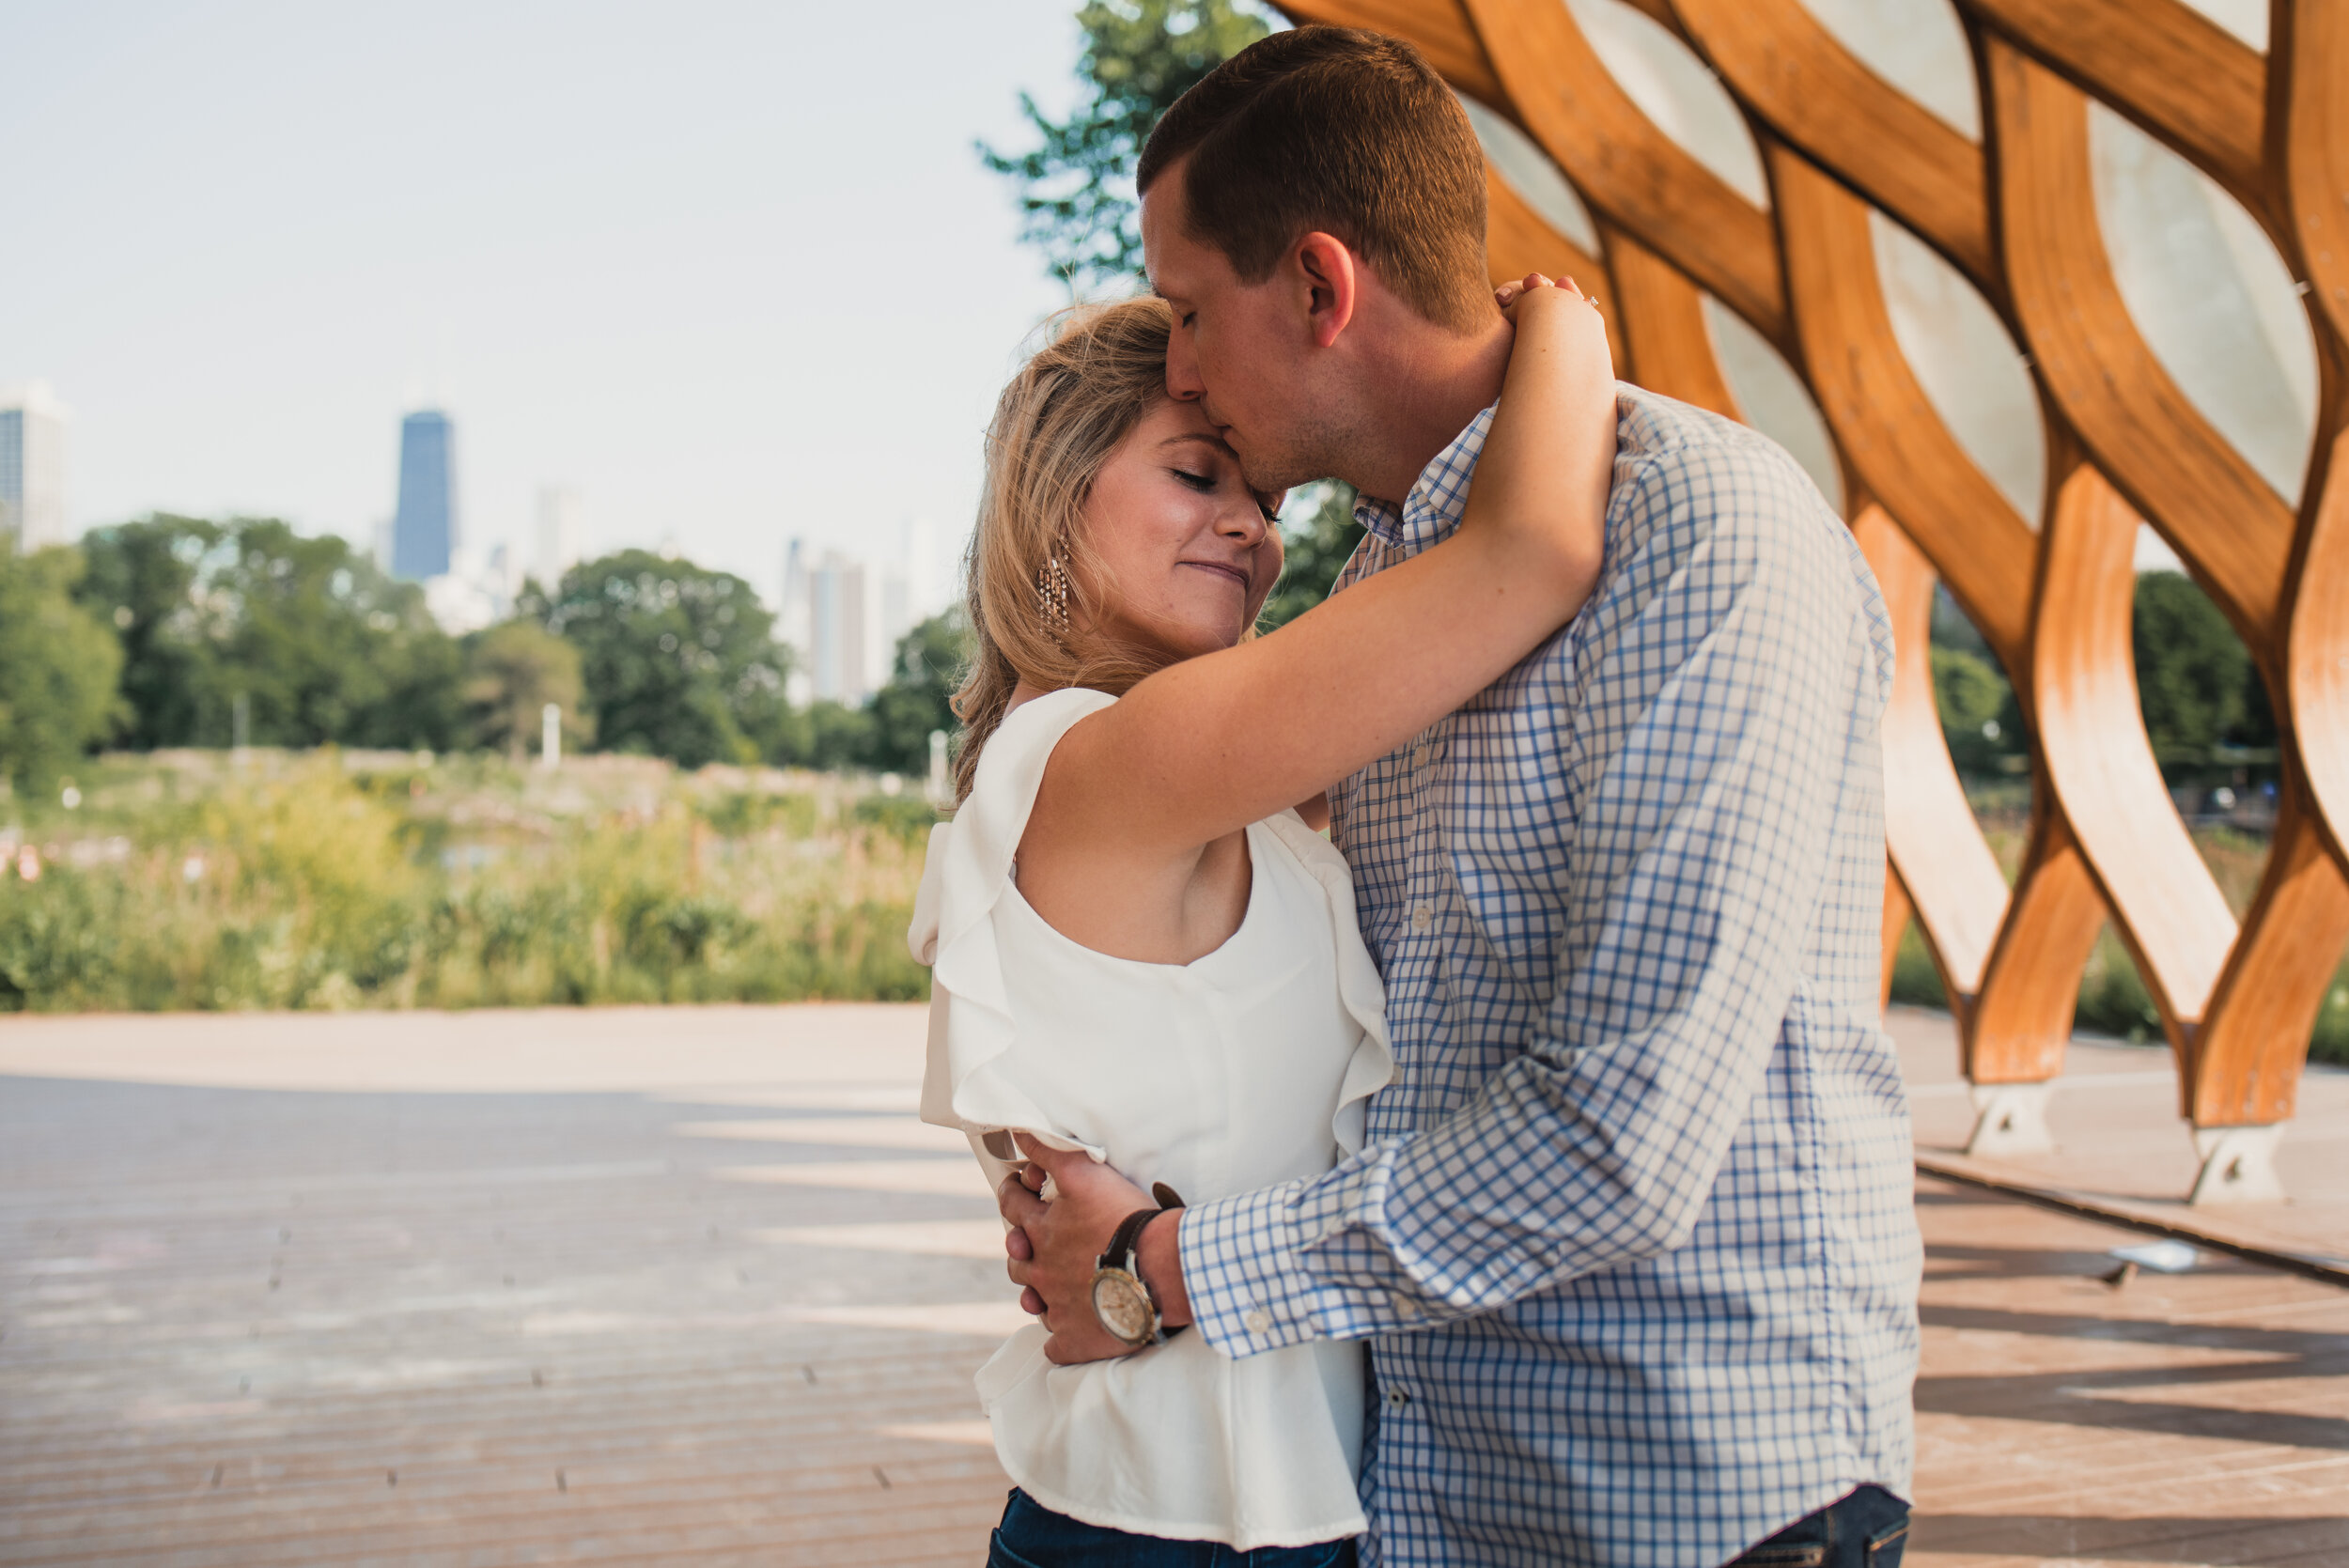 Charming Downtown Chicago Engagement Session captured by Dana Bell Photography